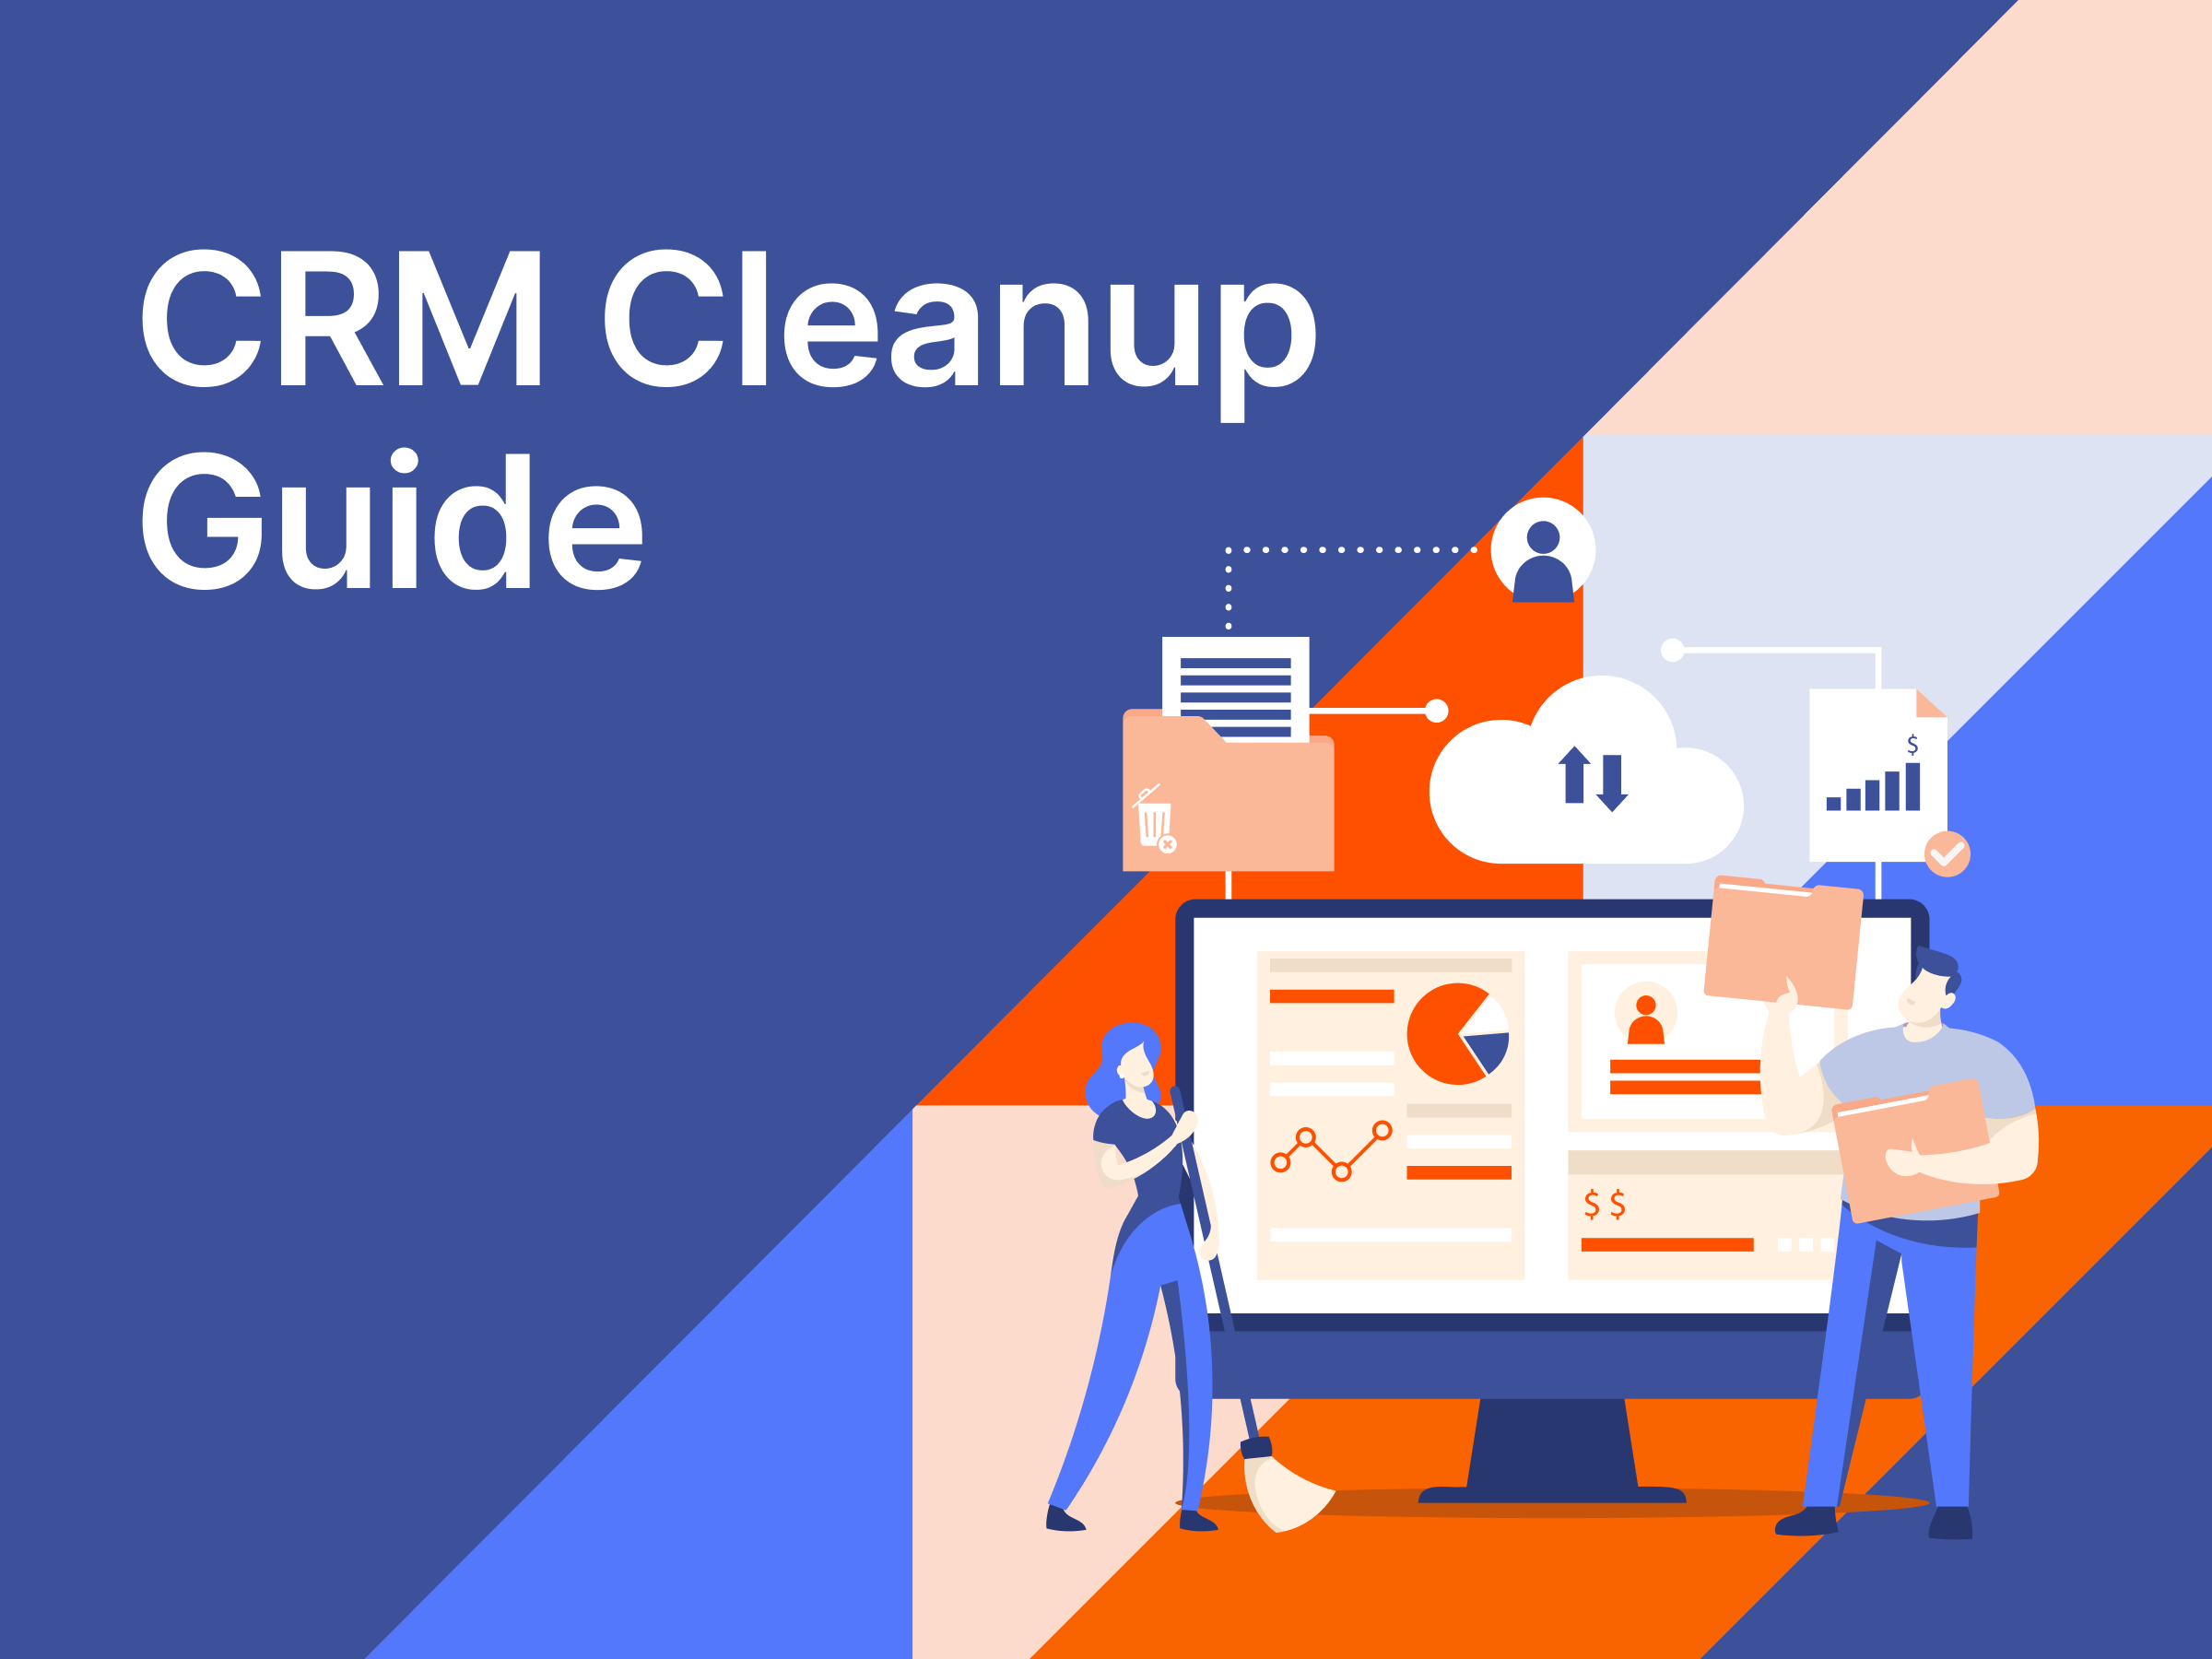 CRM Cleanup Guide